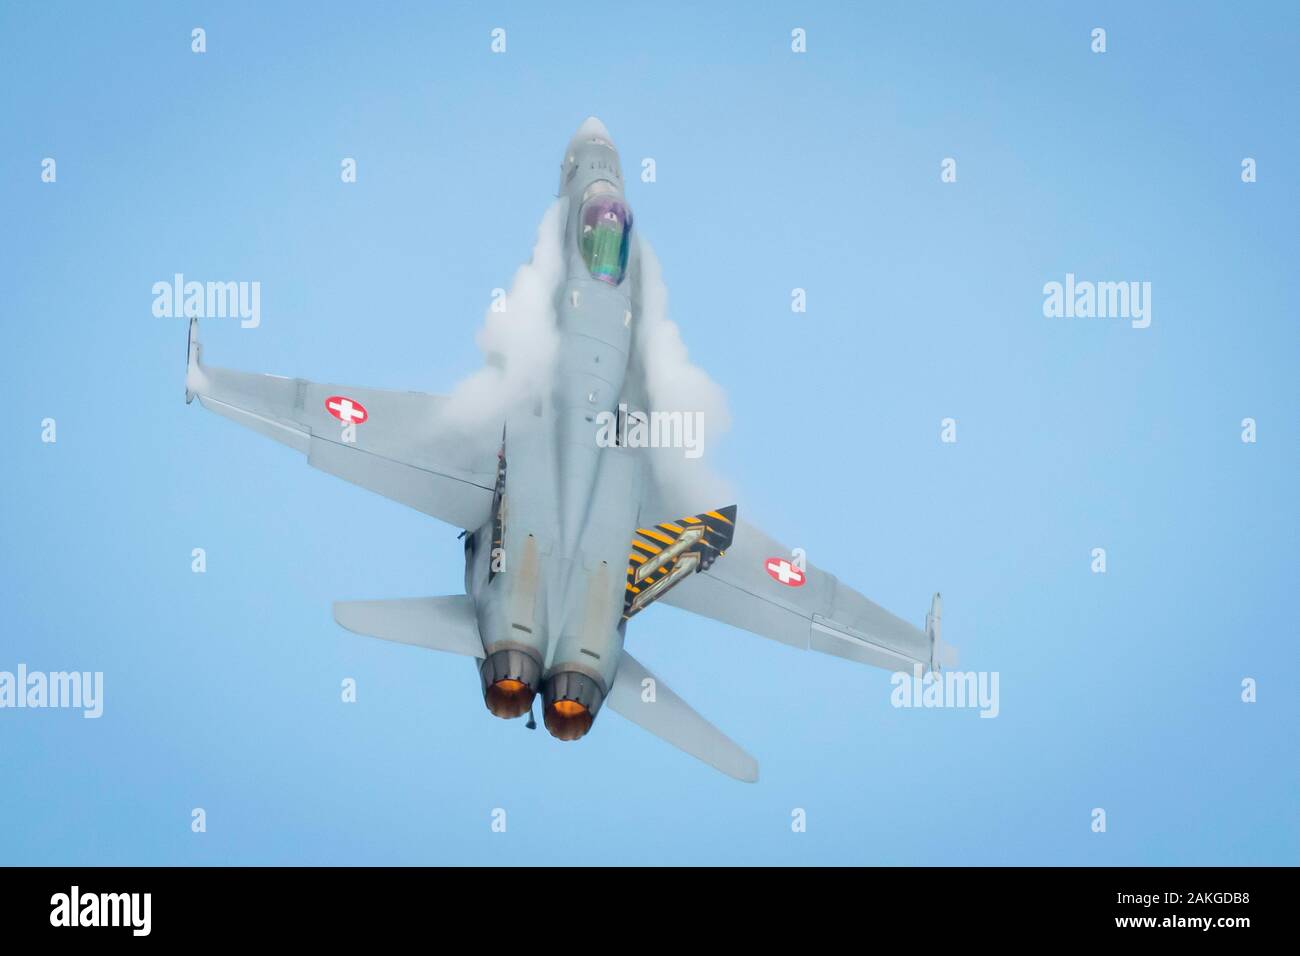 Fairford, Gloucestershire, UK - July 20th, 2019: Swiss Air Force Mcdonnell Douglas F/A-18 Hornet performing its Aerobatic Display at Fairford Internat Stock Photo